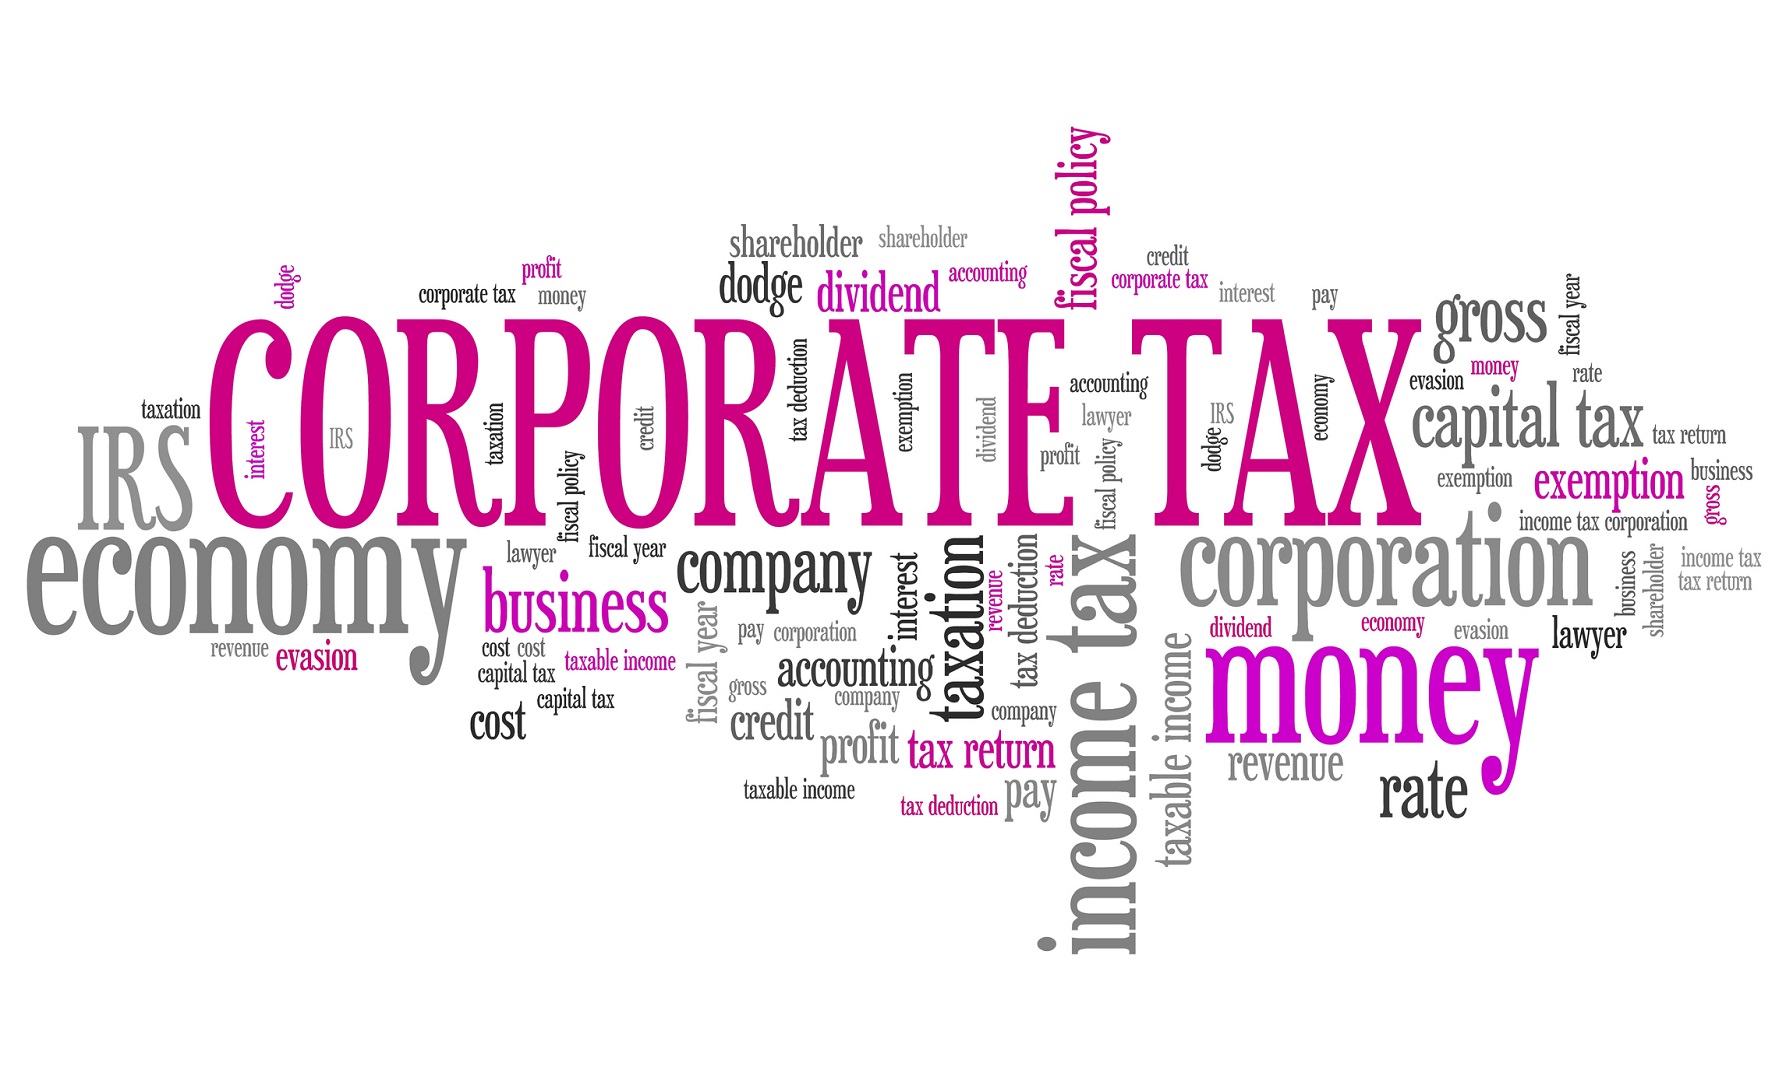 US Corporate Tax Rates - Are They Too High? | Higher Rock ...